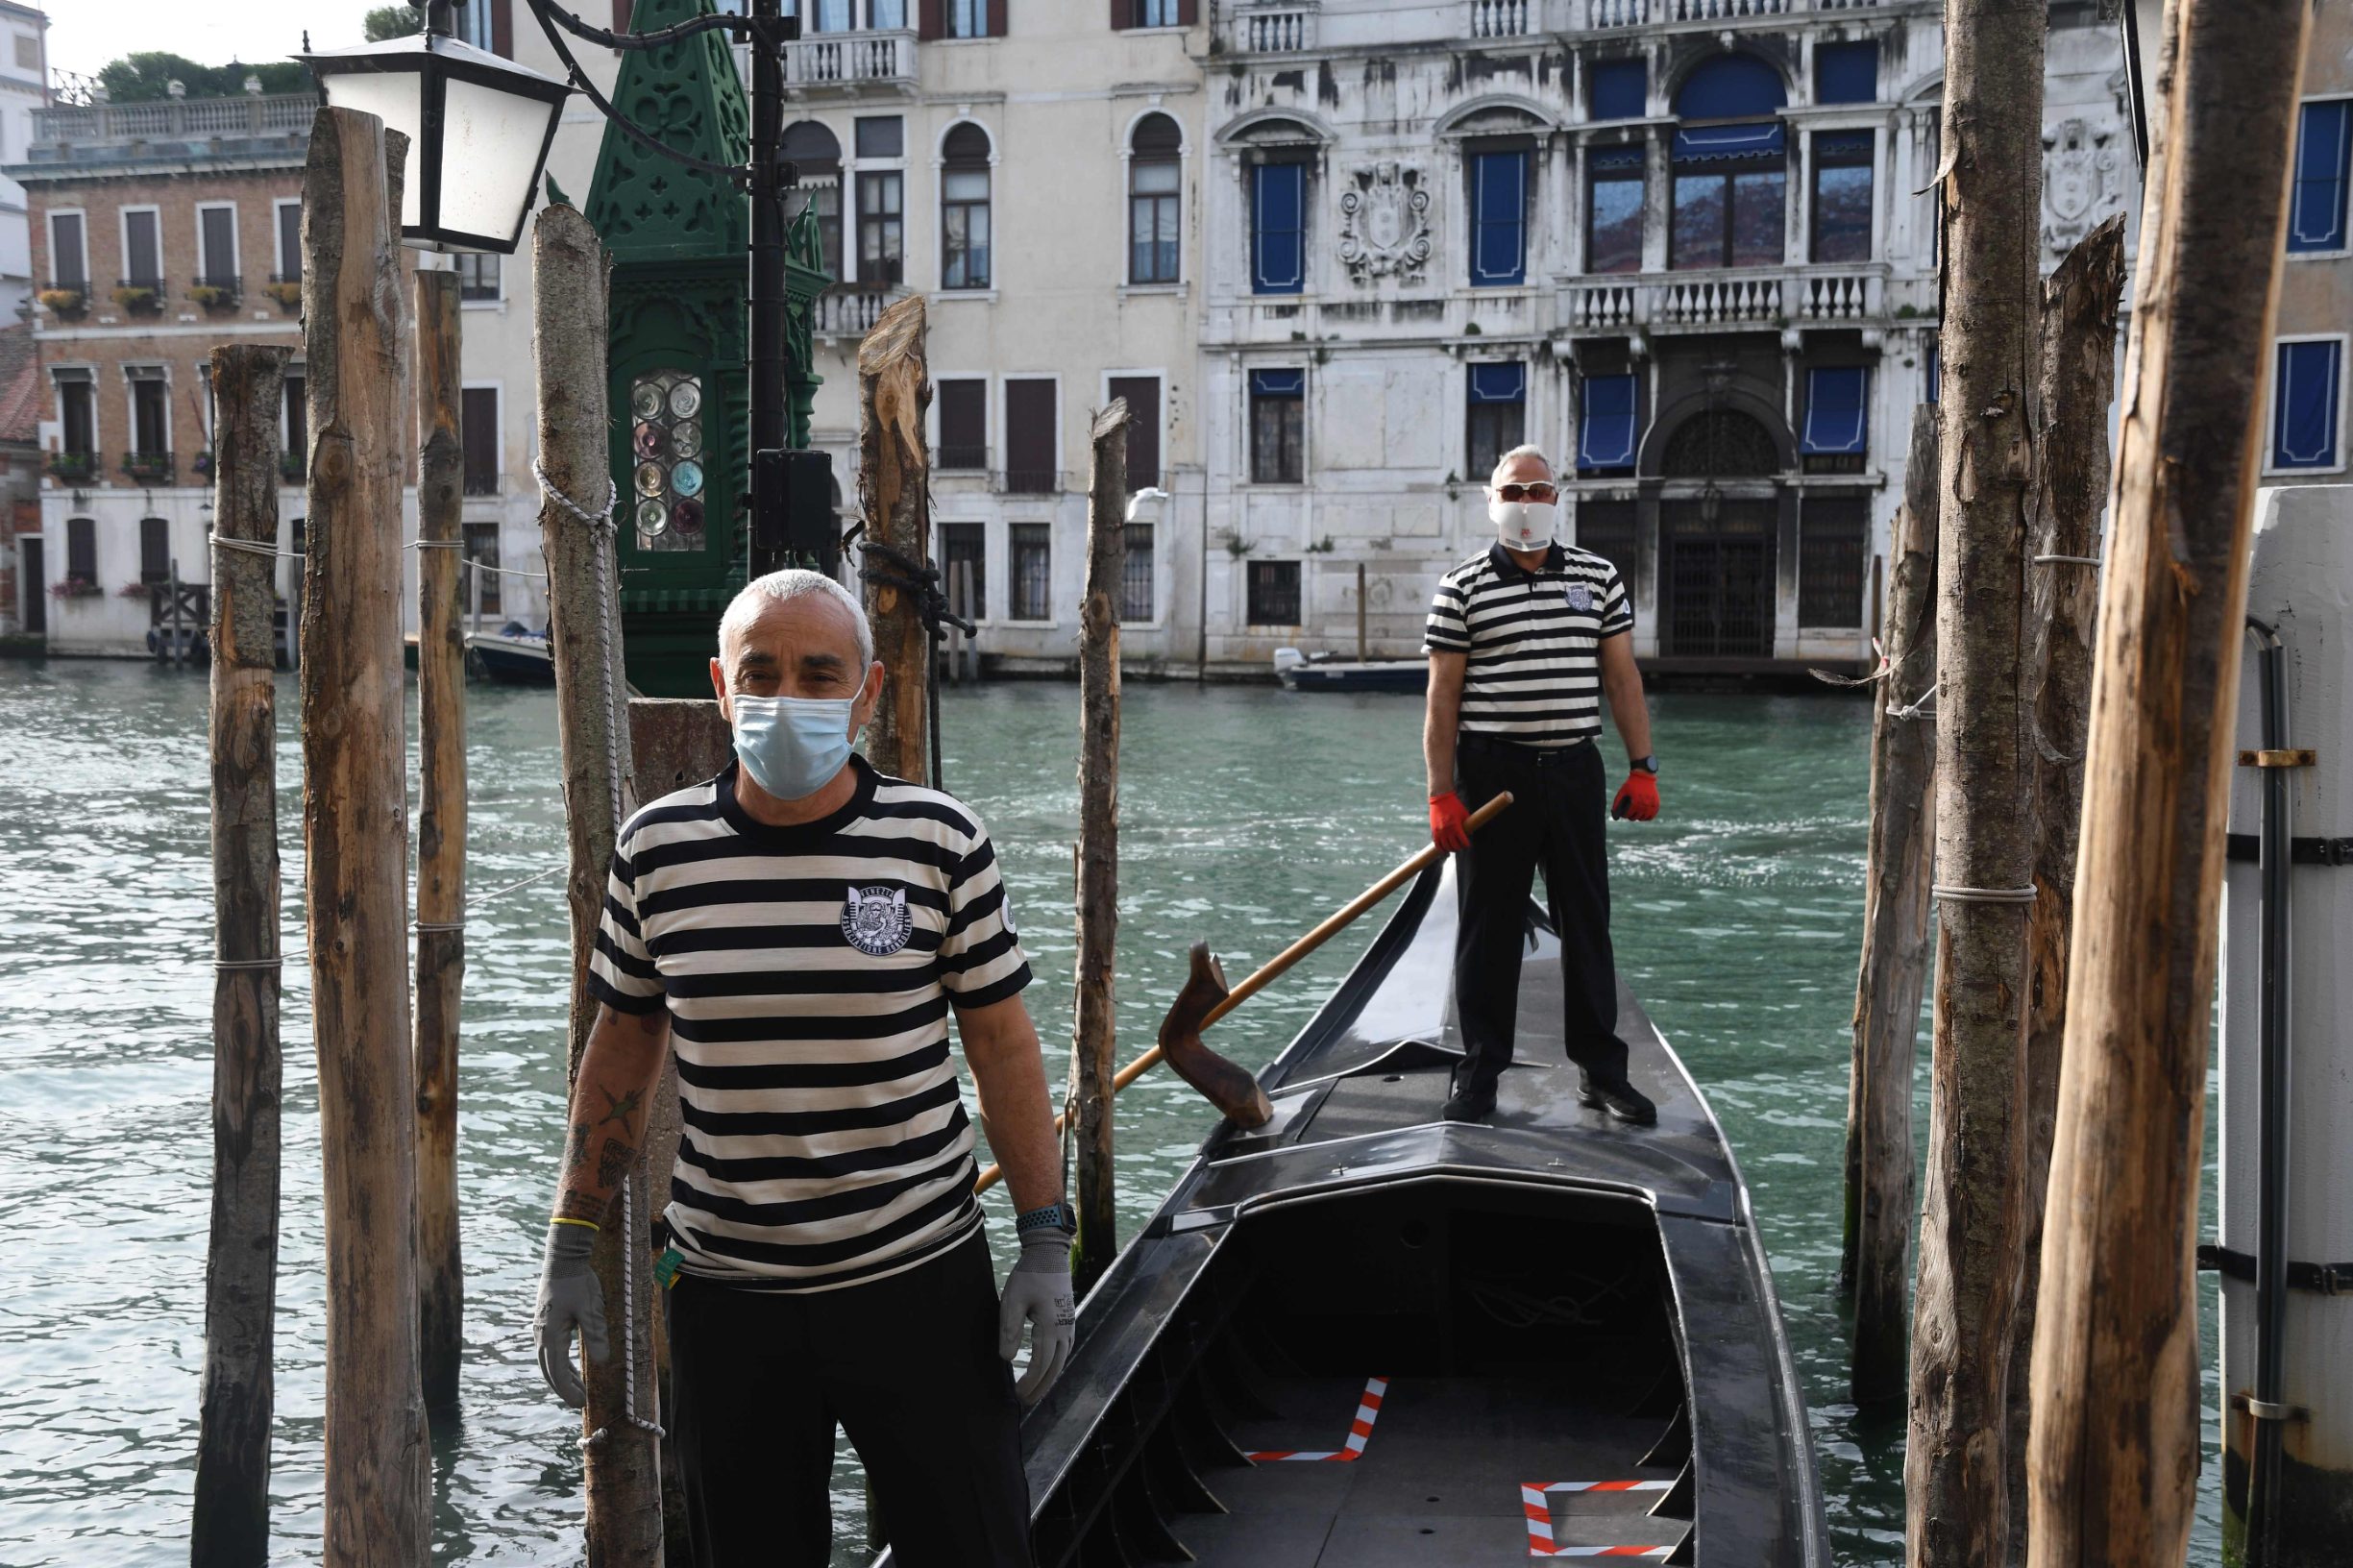 Gondoliers wearing a face mask stand on a gondola on a Venice canal as they resume their service on May 18, 2020 during the country's lockdown aimed at curbing the spread of the COVID-19 infection, caused by the novel coronavirus. - Restaurants and churches reopen in Italy on May 18, 2020 as part of a fresh wave of lockdown easing in Europe and the country's latest step in a cautious, gradual return to normality, allowing businesses and churches to reopen after a two-month lockdown. (Photo by ANDREA PATTARO / AFP)